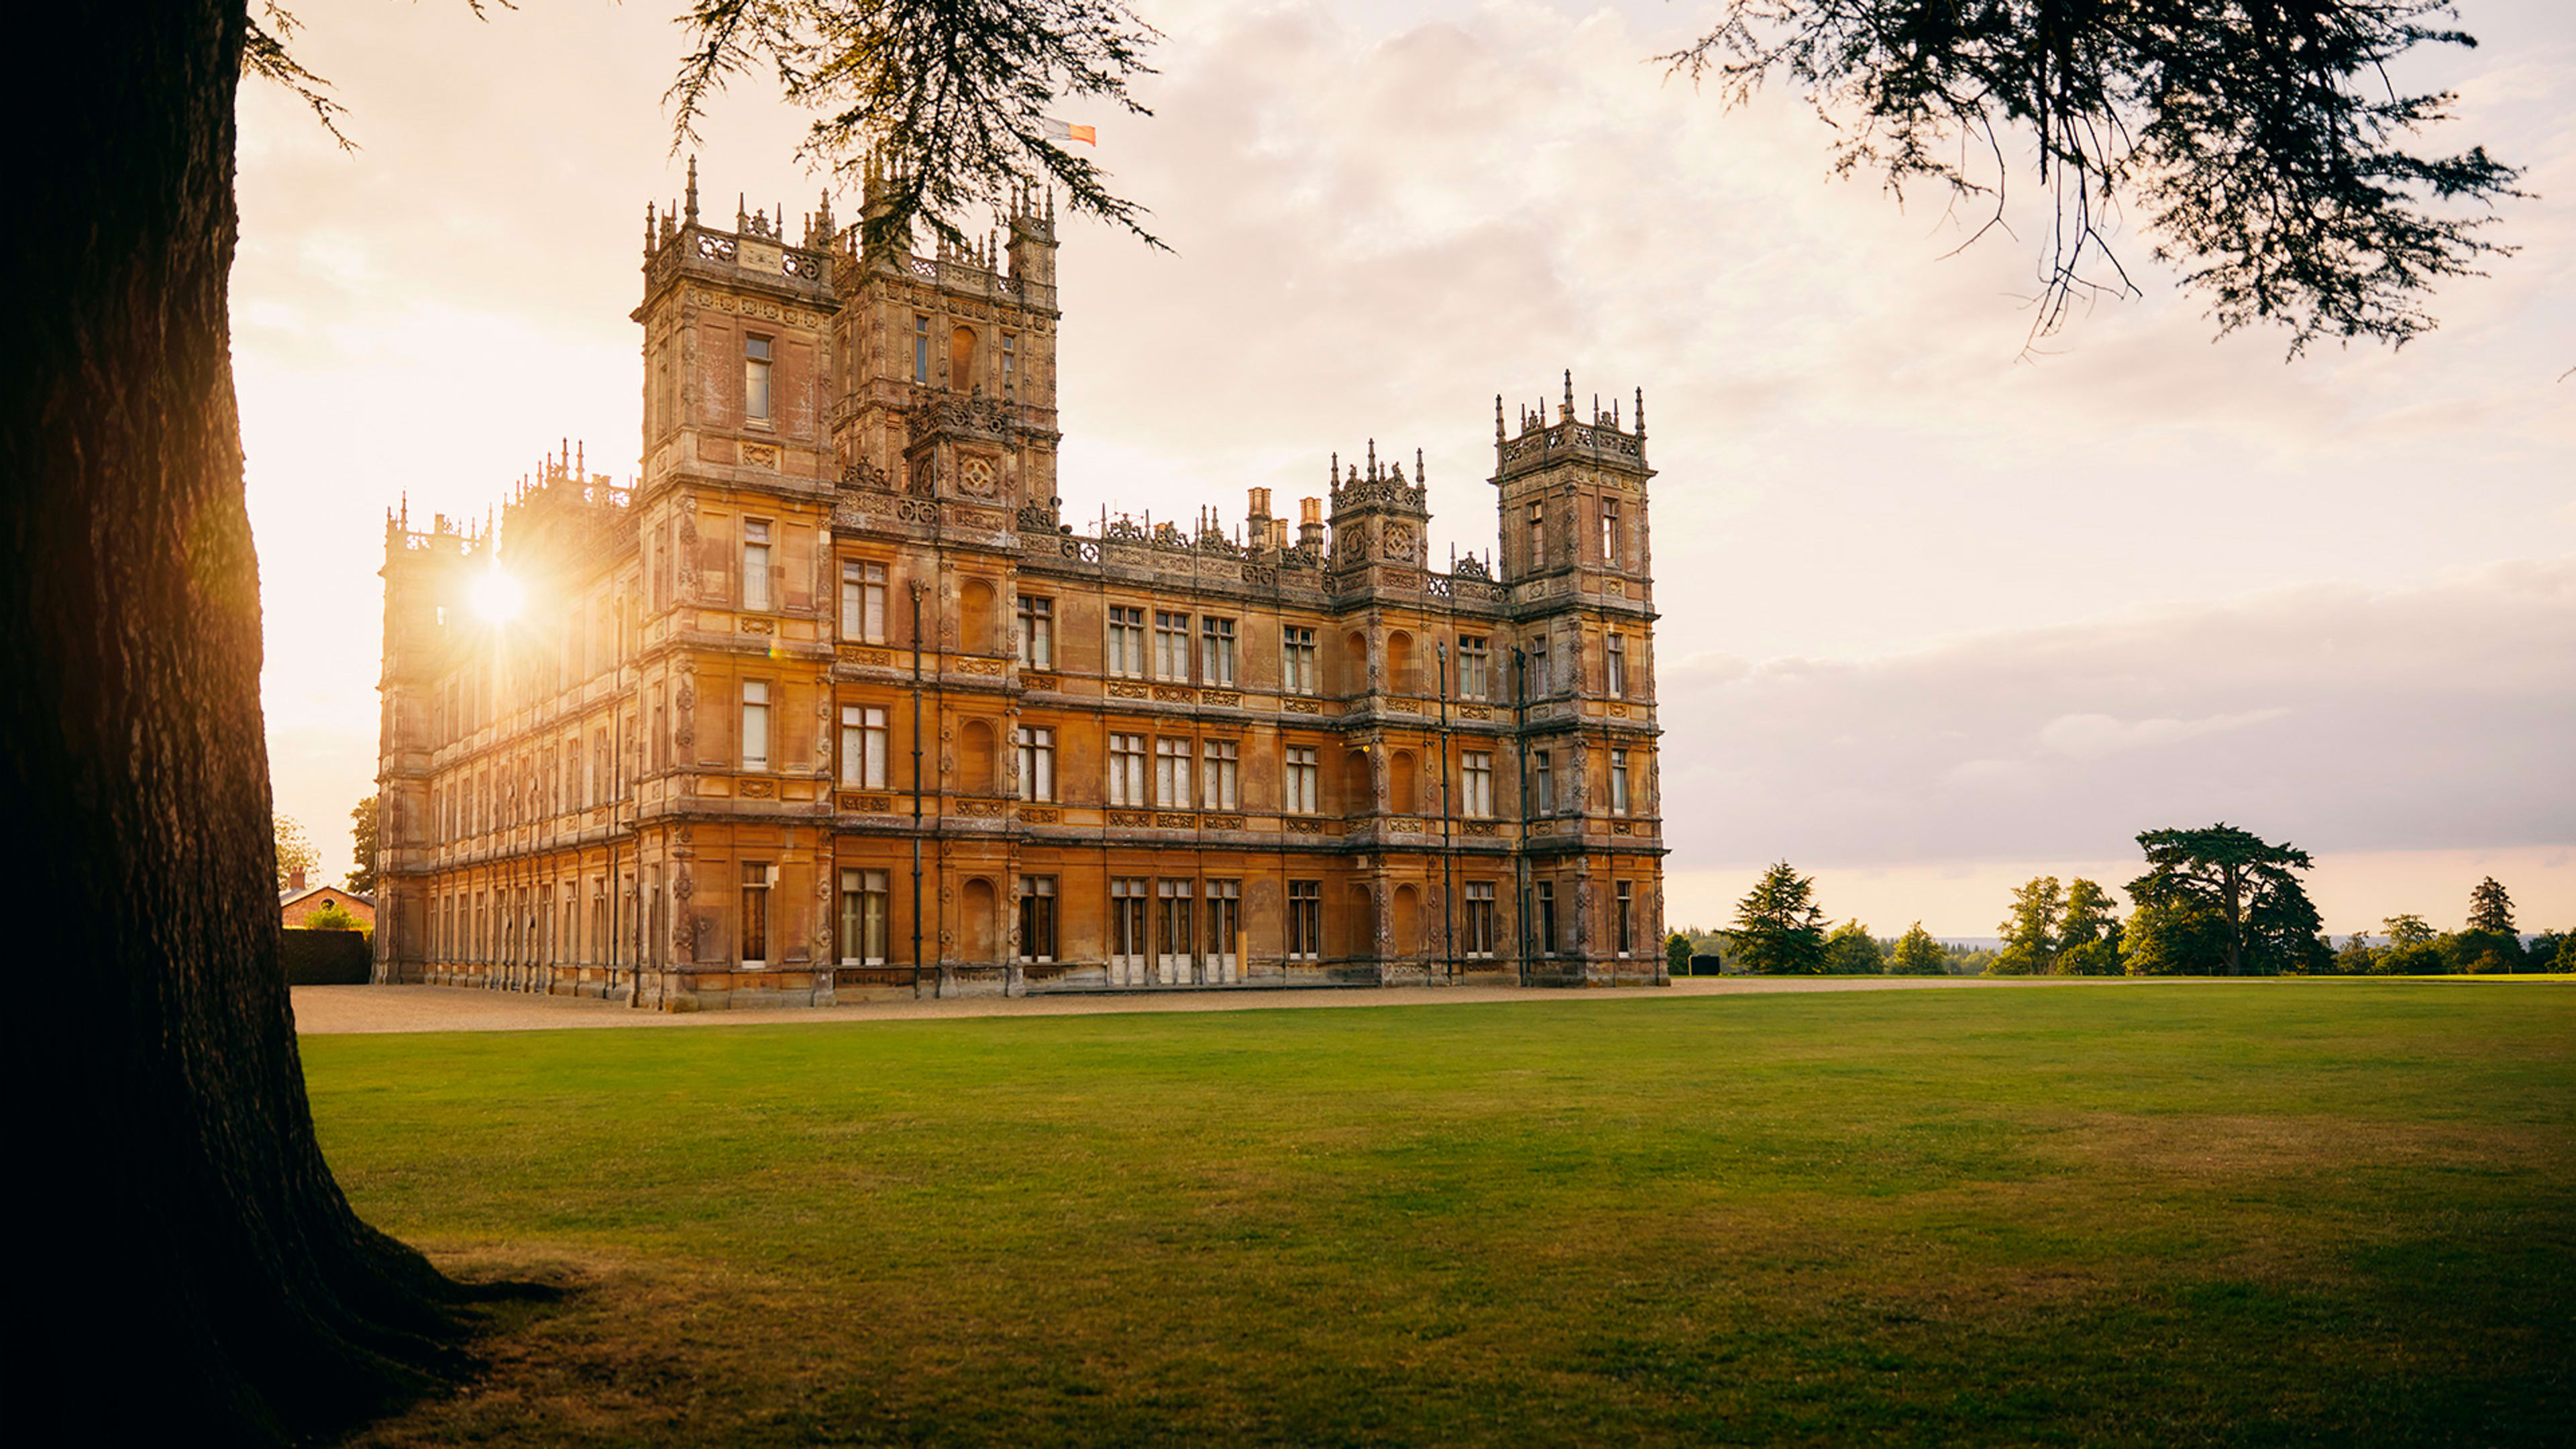 You can rent the Downton Abbey castle on Airbnb for one night—here’s how